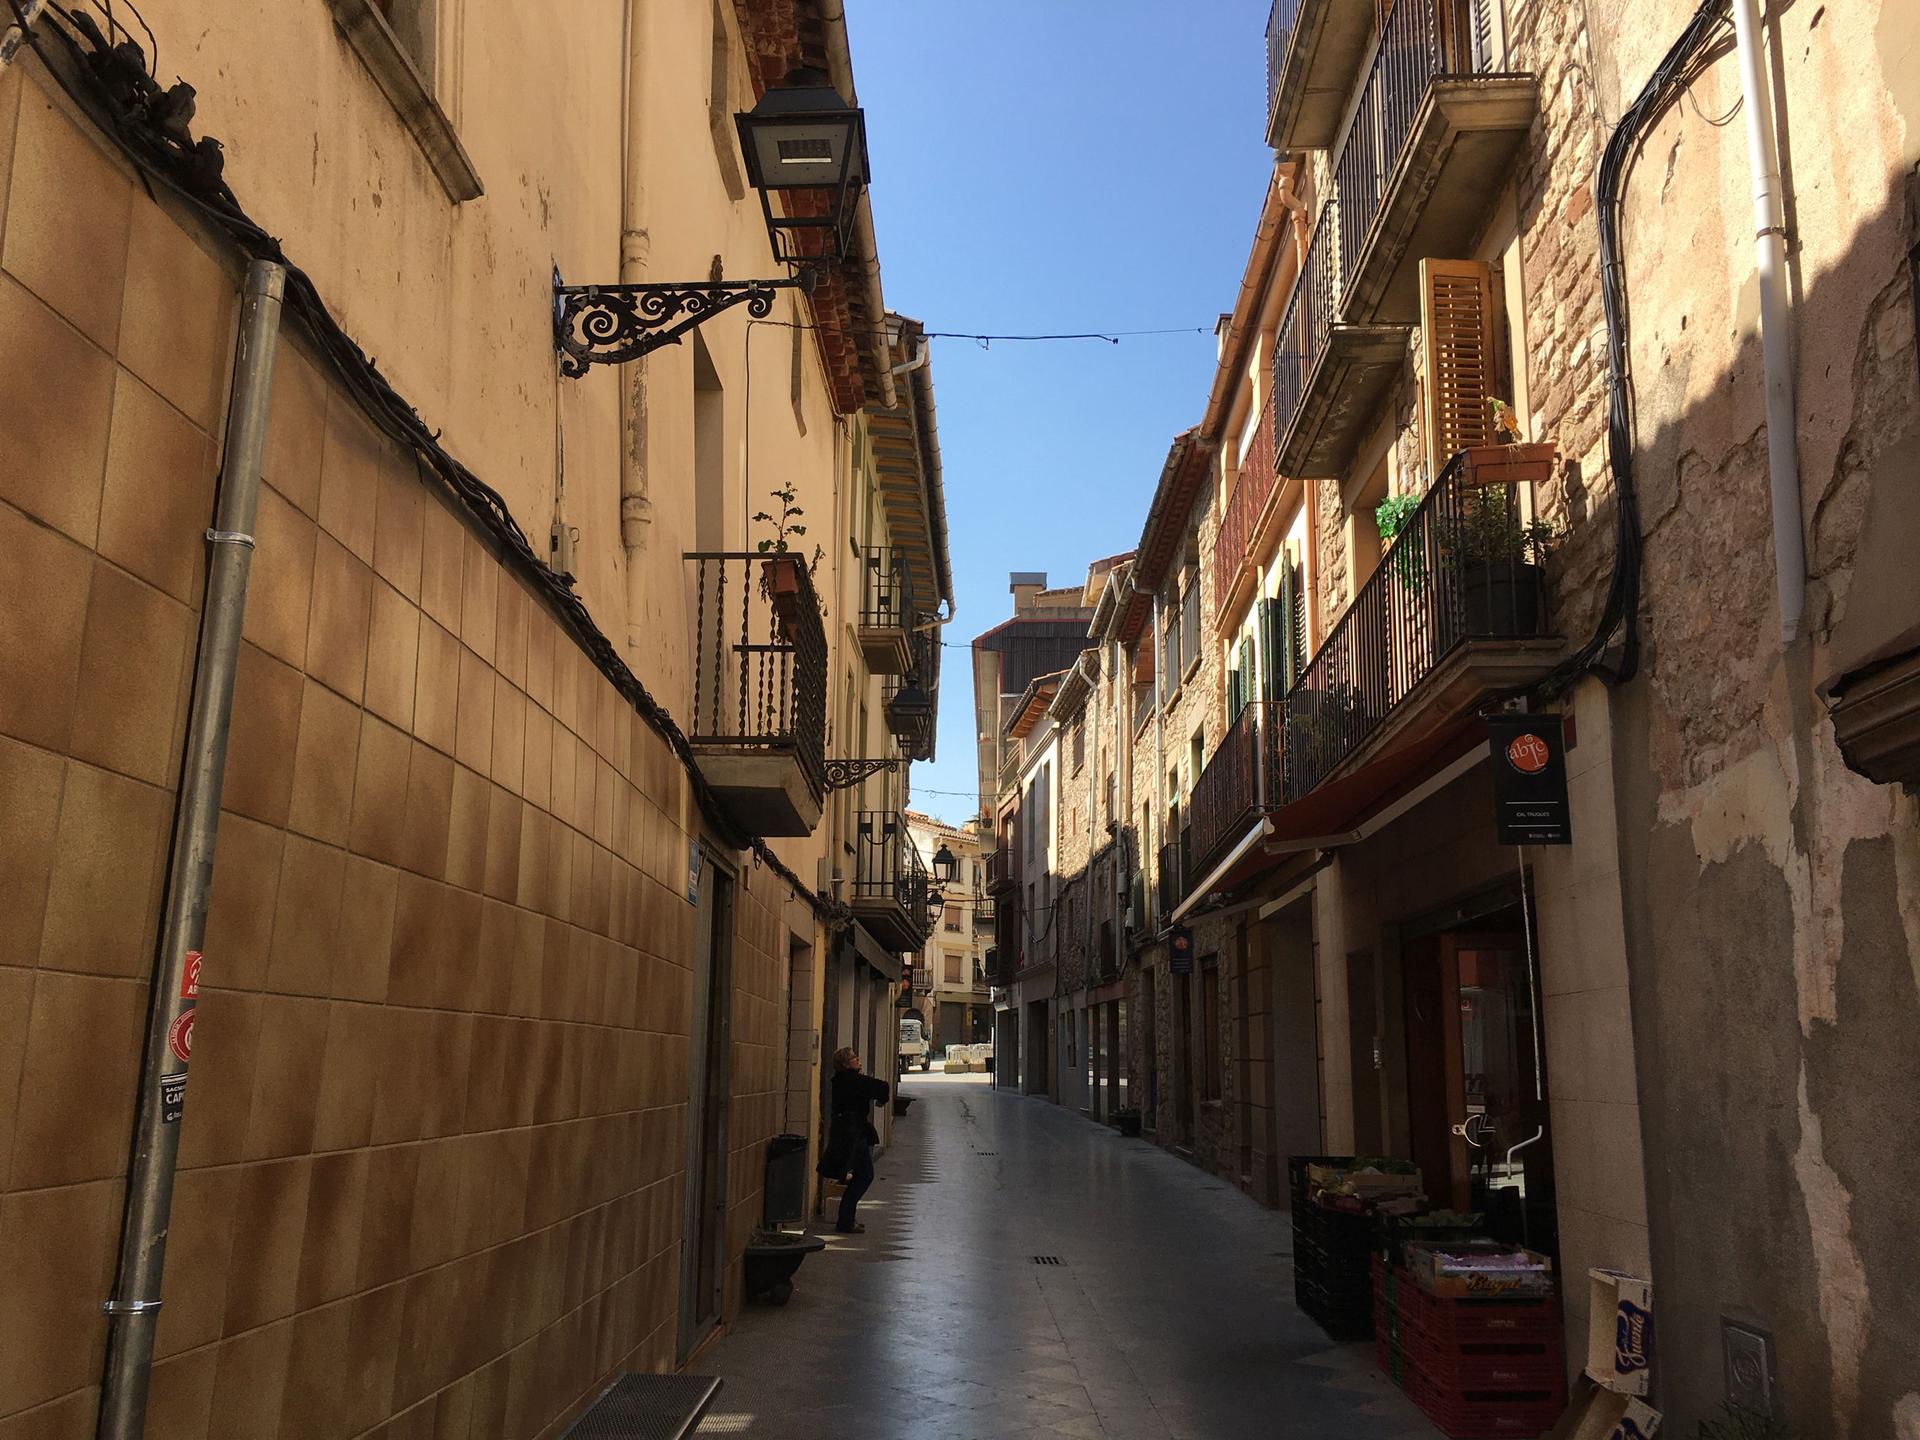 A pedestrian on a nearly deserted street in Moia, Spain.